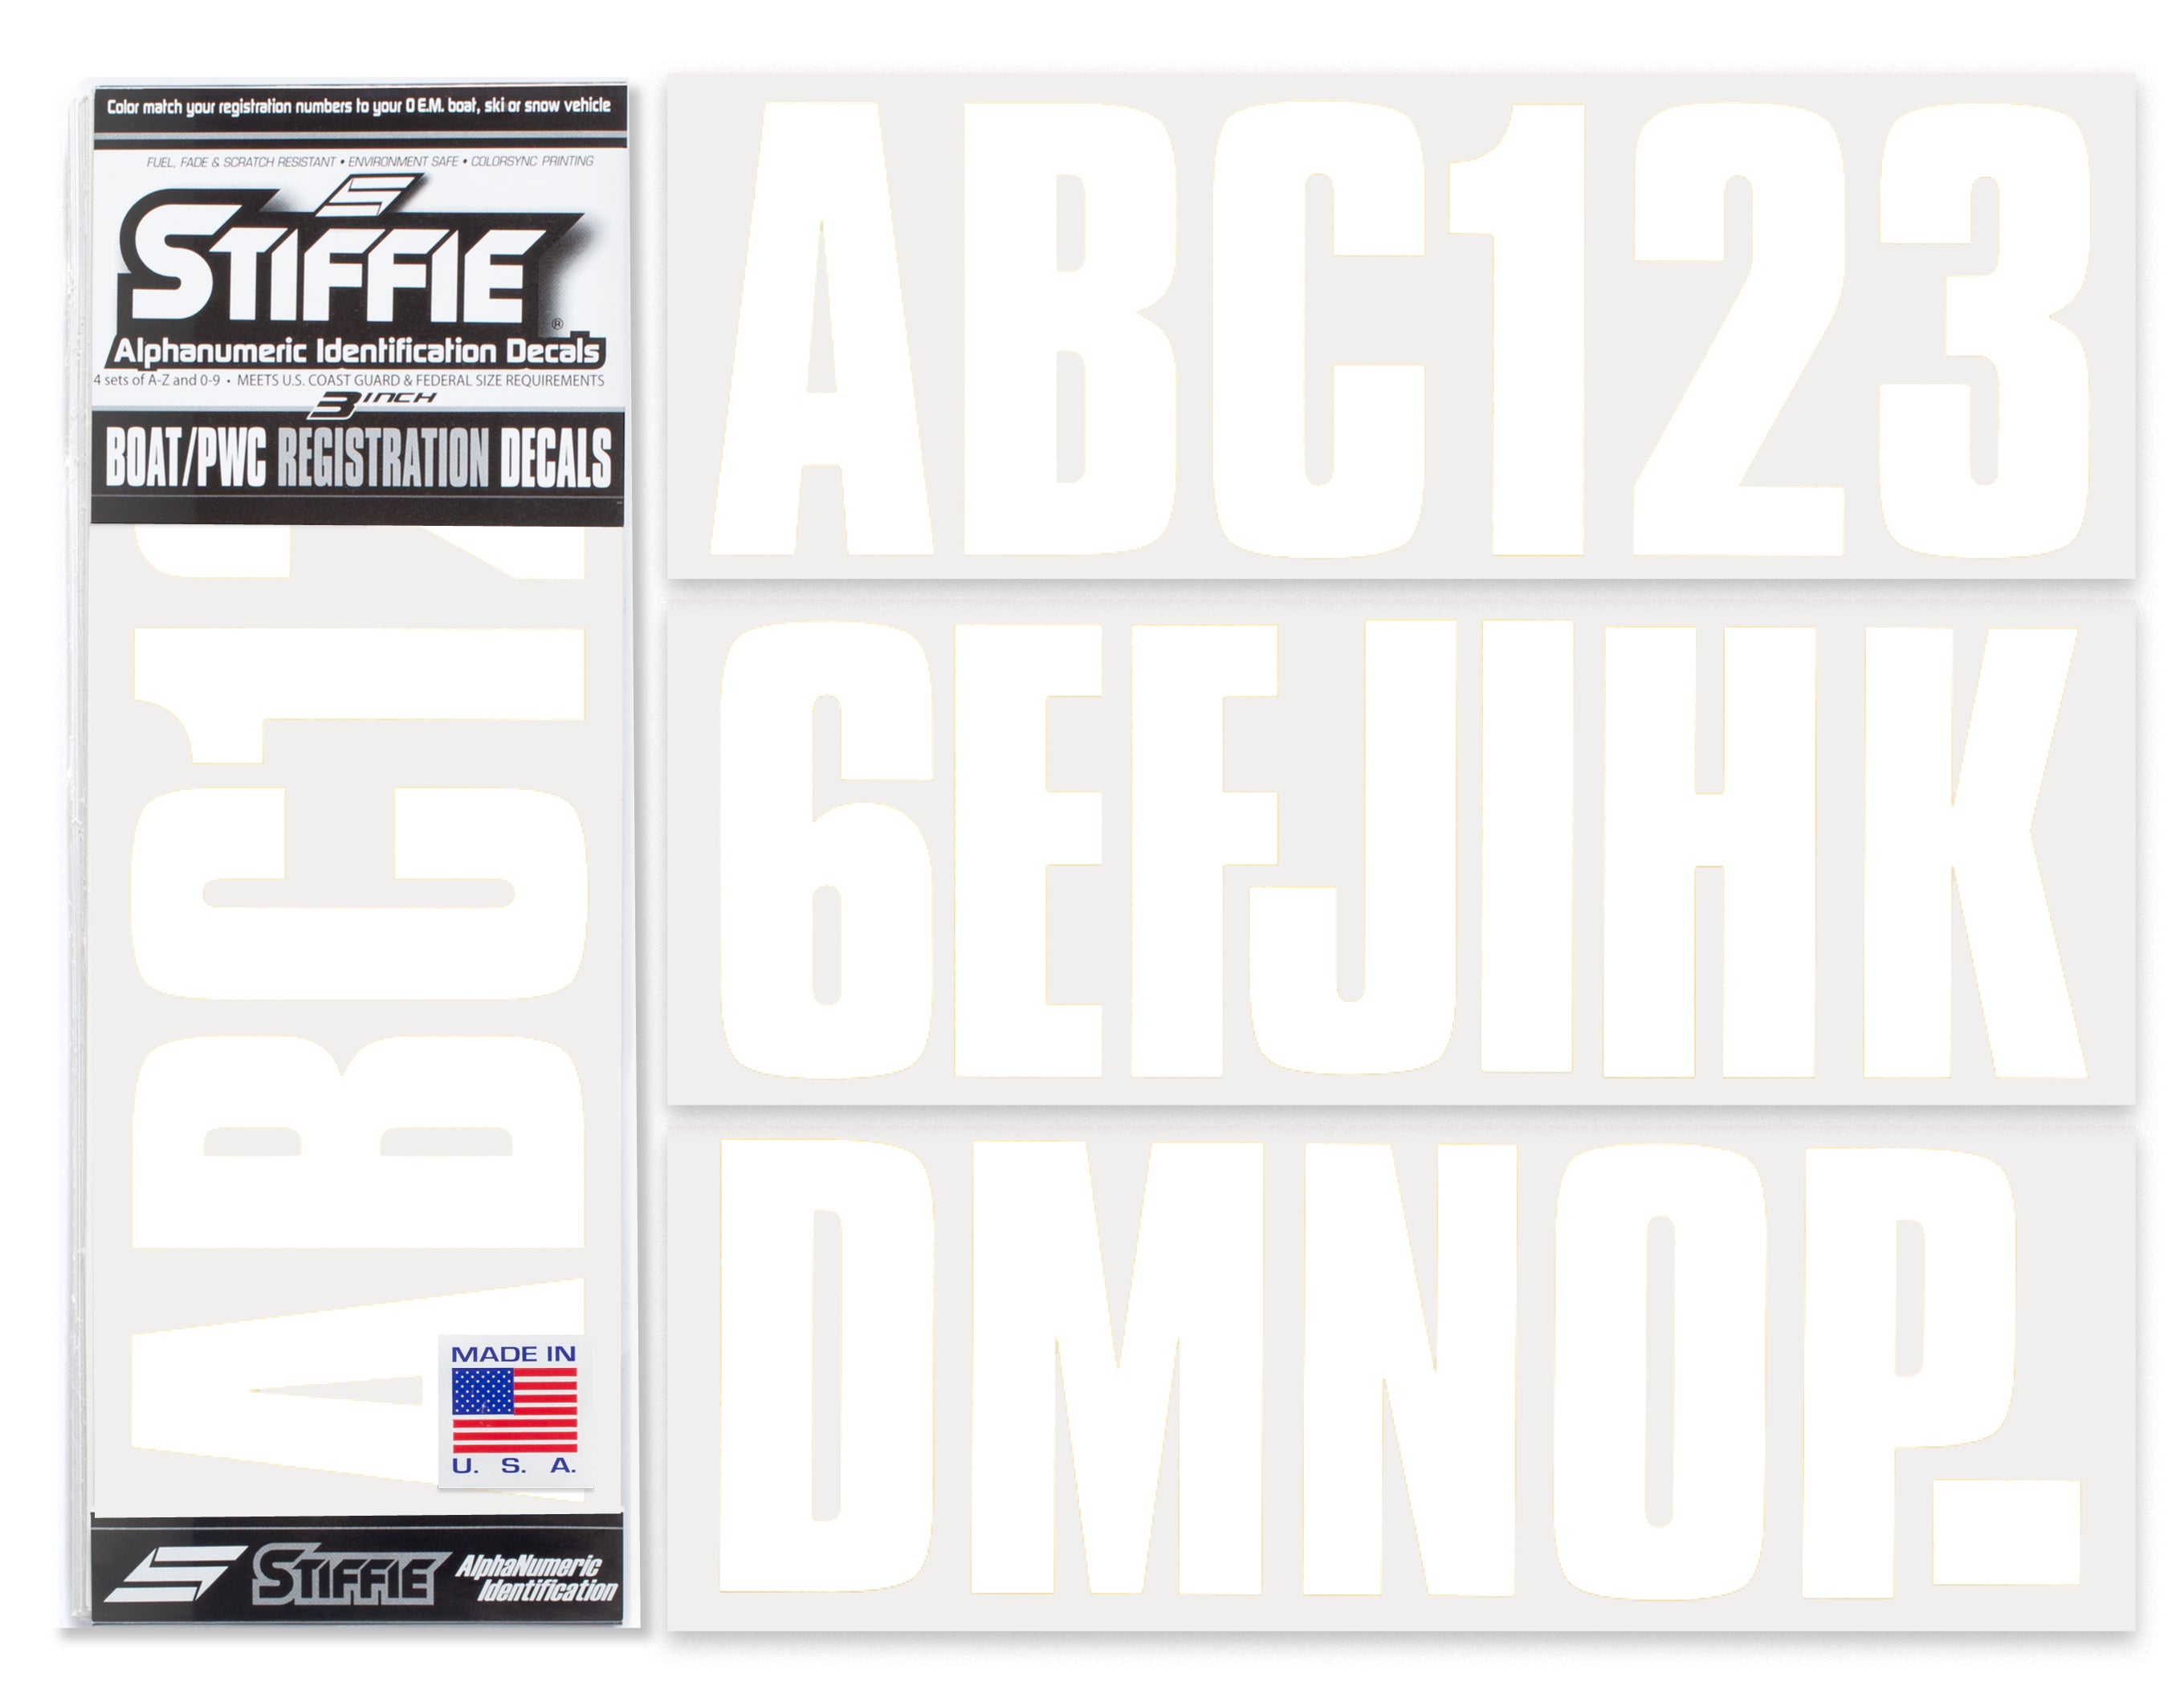 STIFFIE Uniline White 3" ID Kit Alpha-Numeric Registration Identification Numbers Stickers Decals for Boats & Personal Watercraft